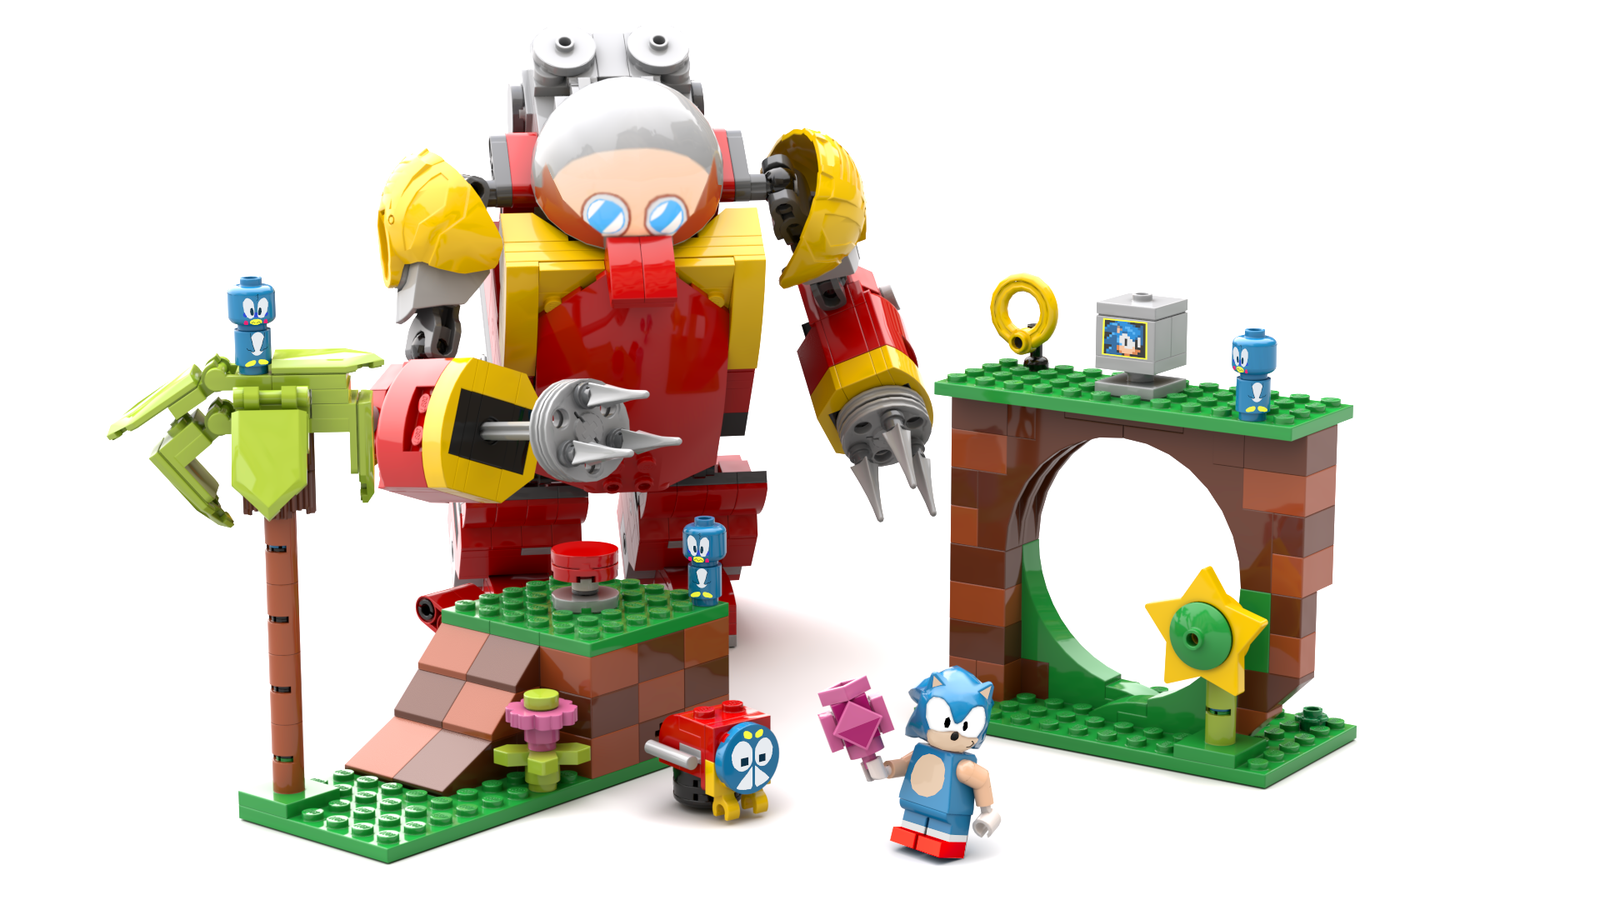 Introducing the New Lego Sonic the Hedgehog Set and more! - Investabrick